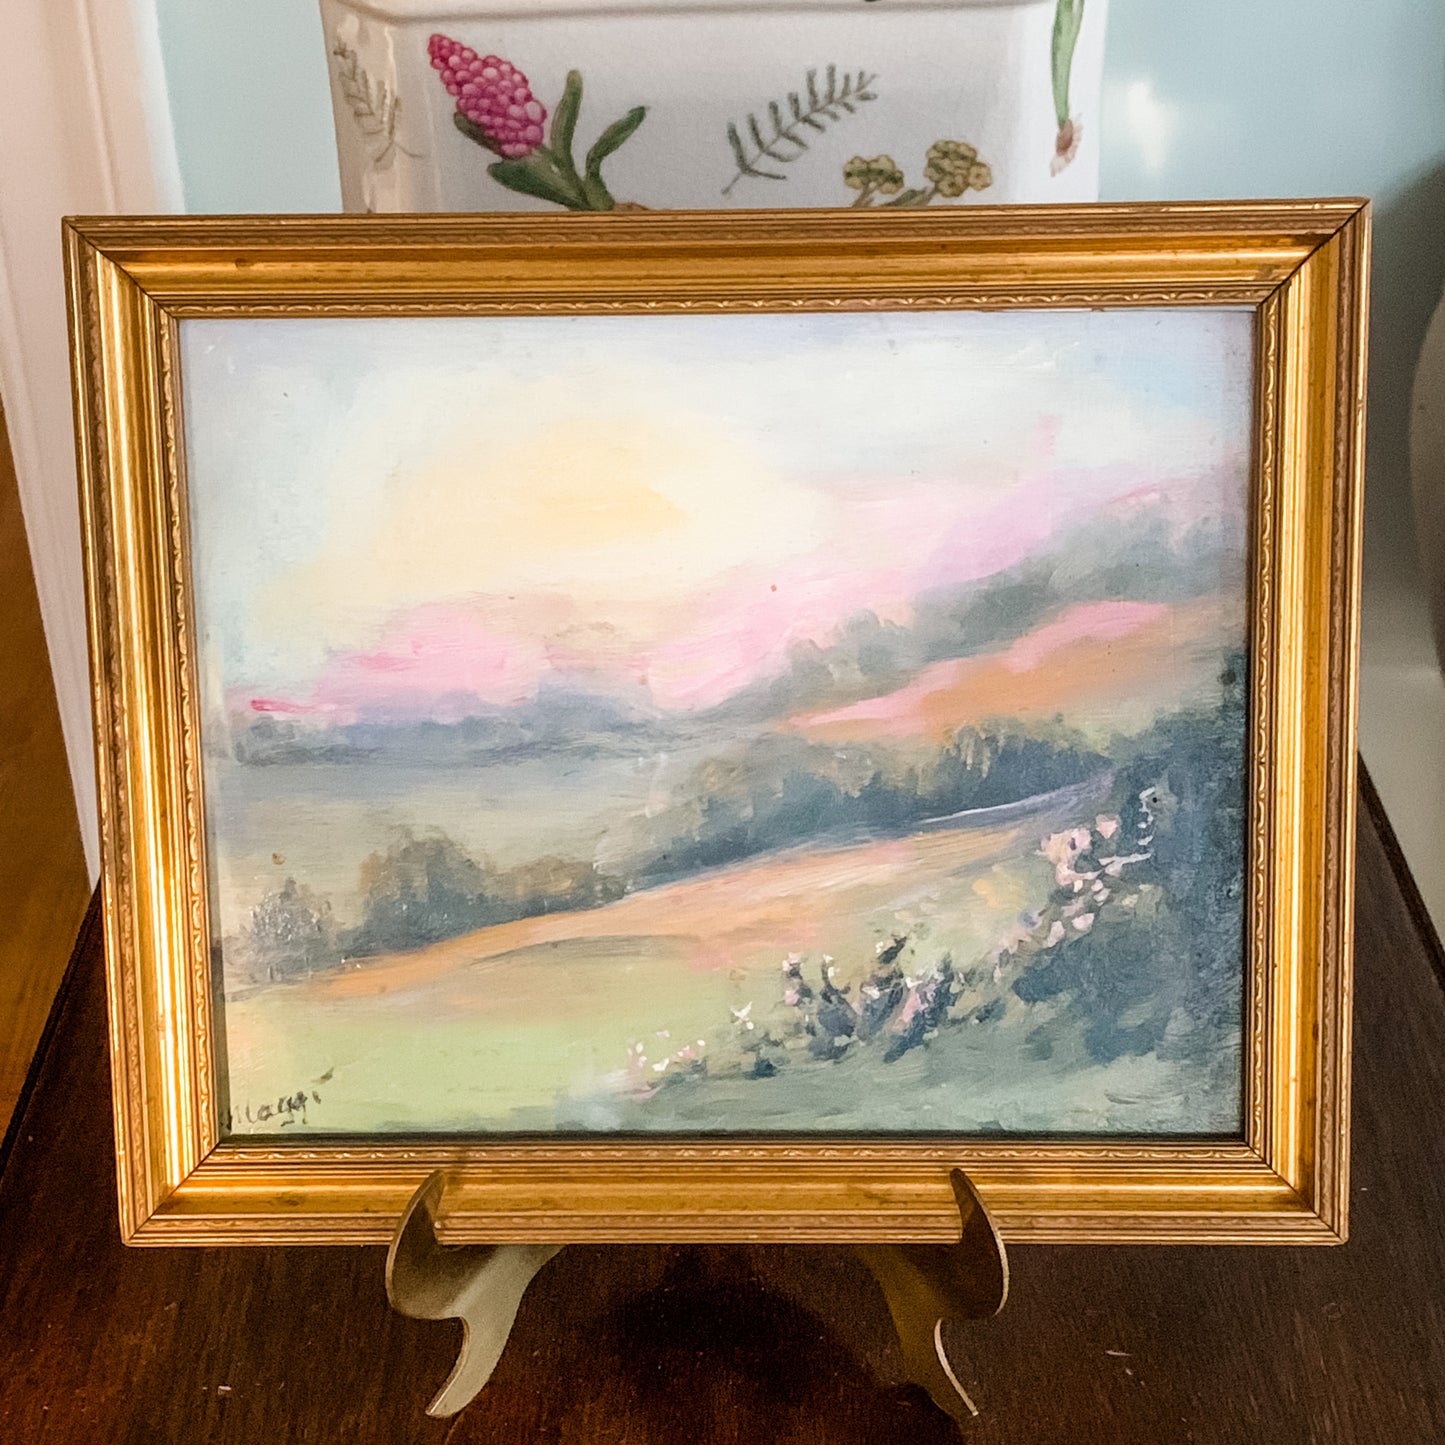 Charming Original Oil Painting of Countryside